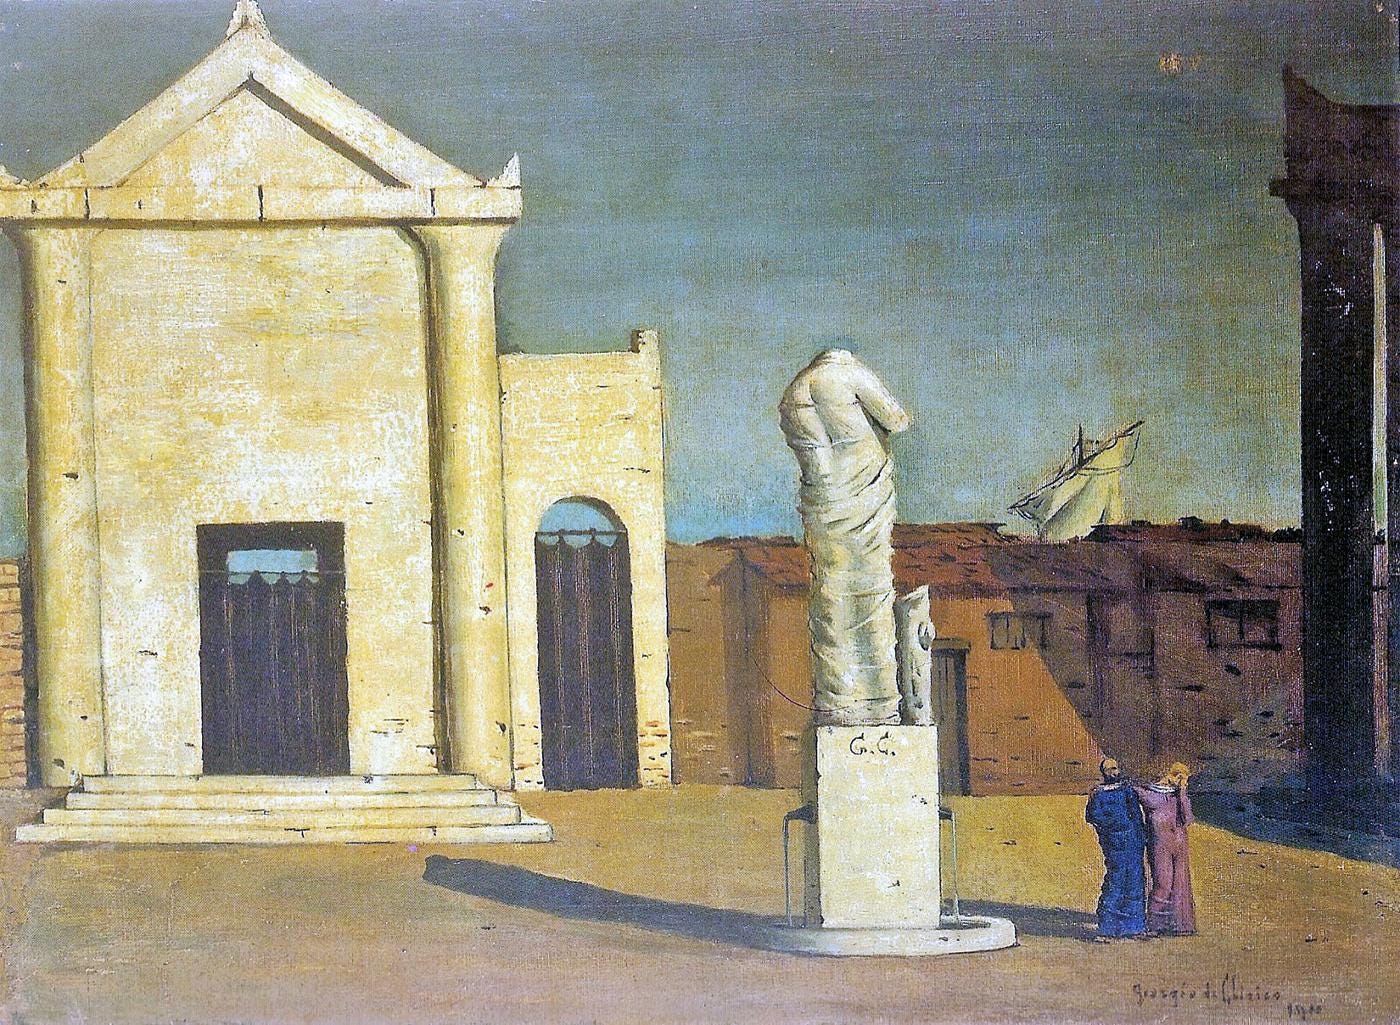 Giorgio de Chirico - The Enigma of an Autumn Afternoon (1910) [1400x1025] -  The best designs and art from the internet